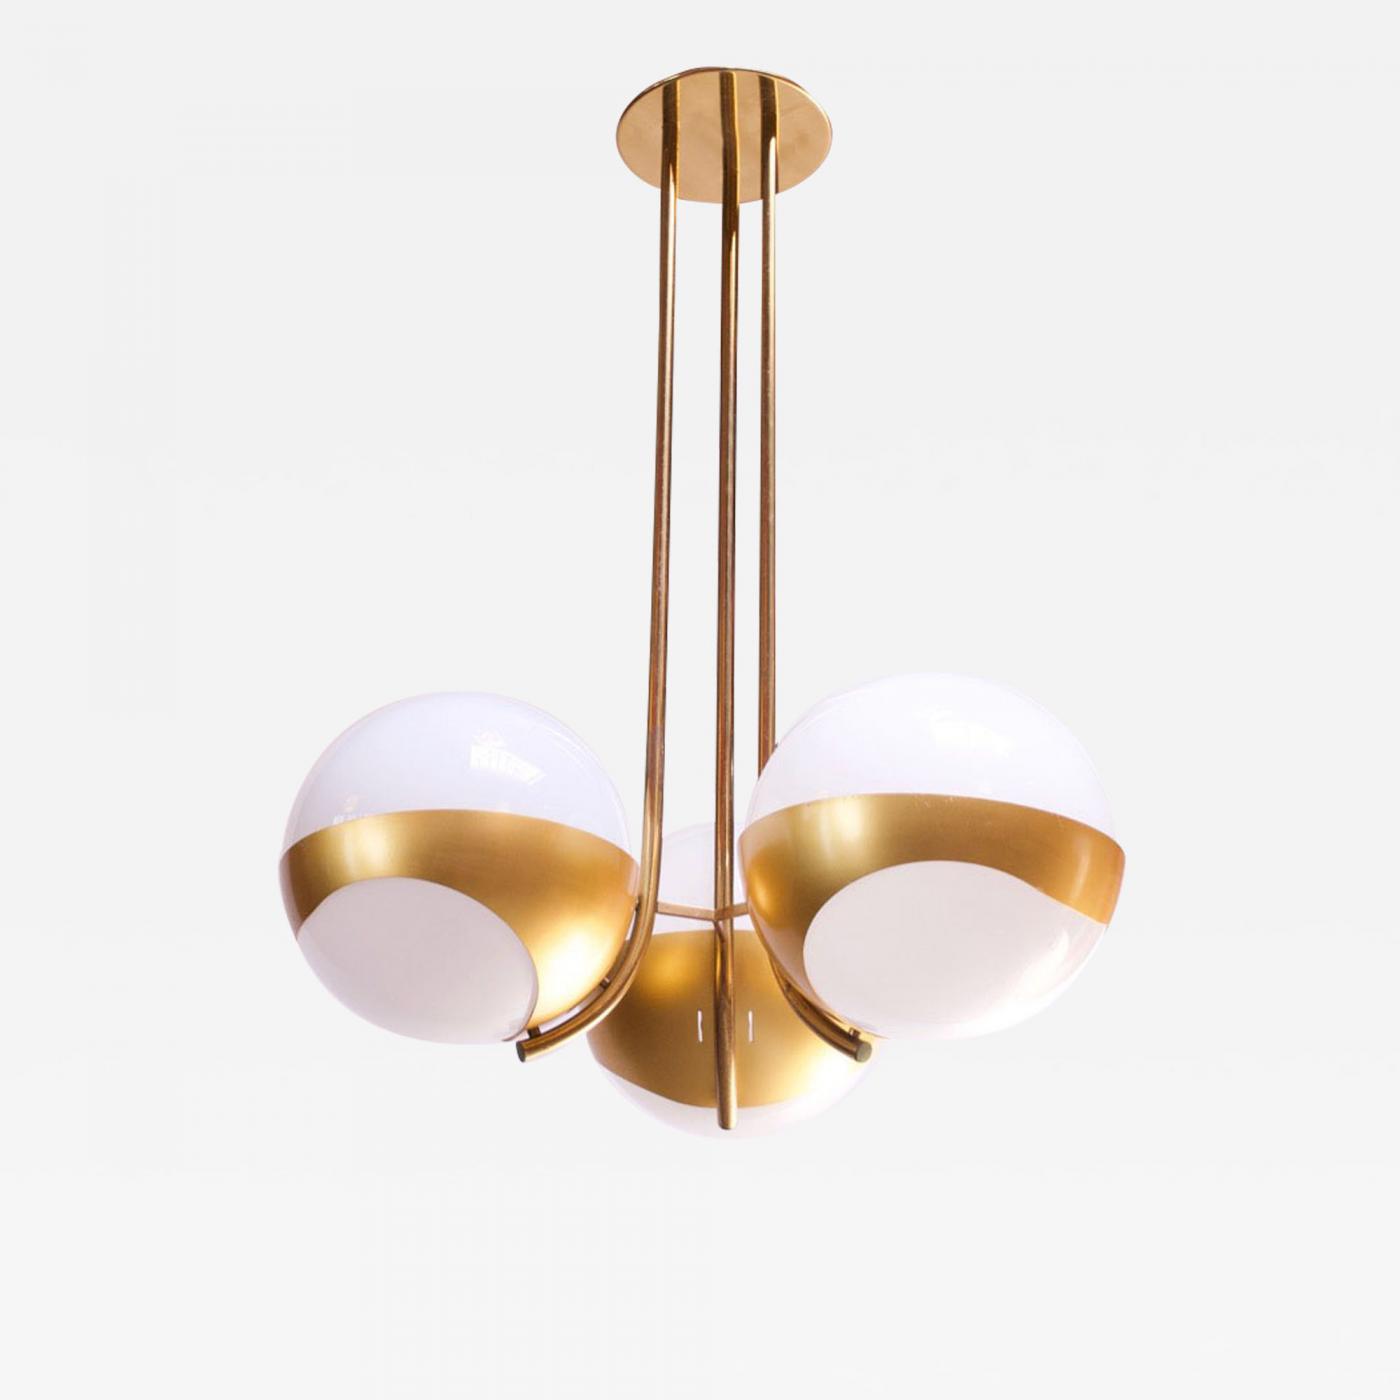 https://cdn.incollect.com/sites/default/files/zoom/-Lamperti-Large-Italian-Modern-Brass-and-Milk-Glass-Chandelier-by-Lamperti-316642-1073669.jpg